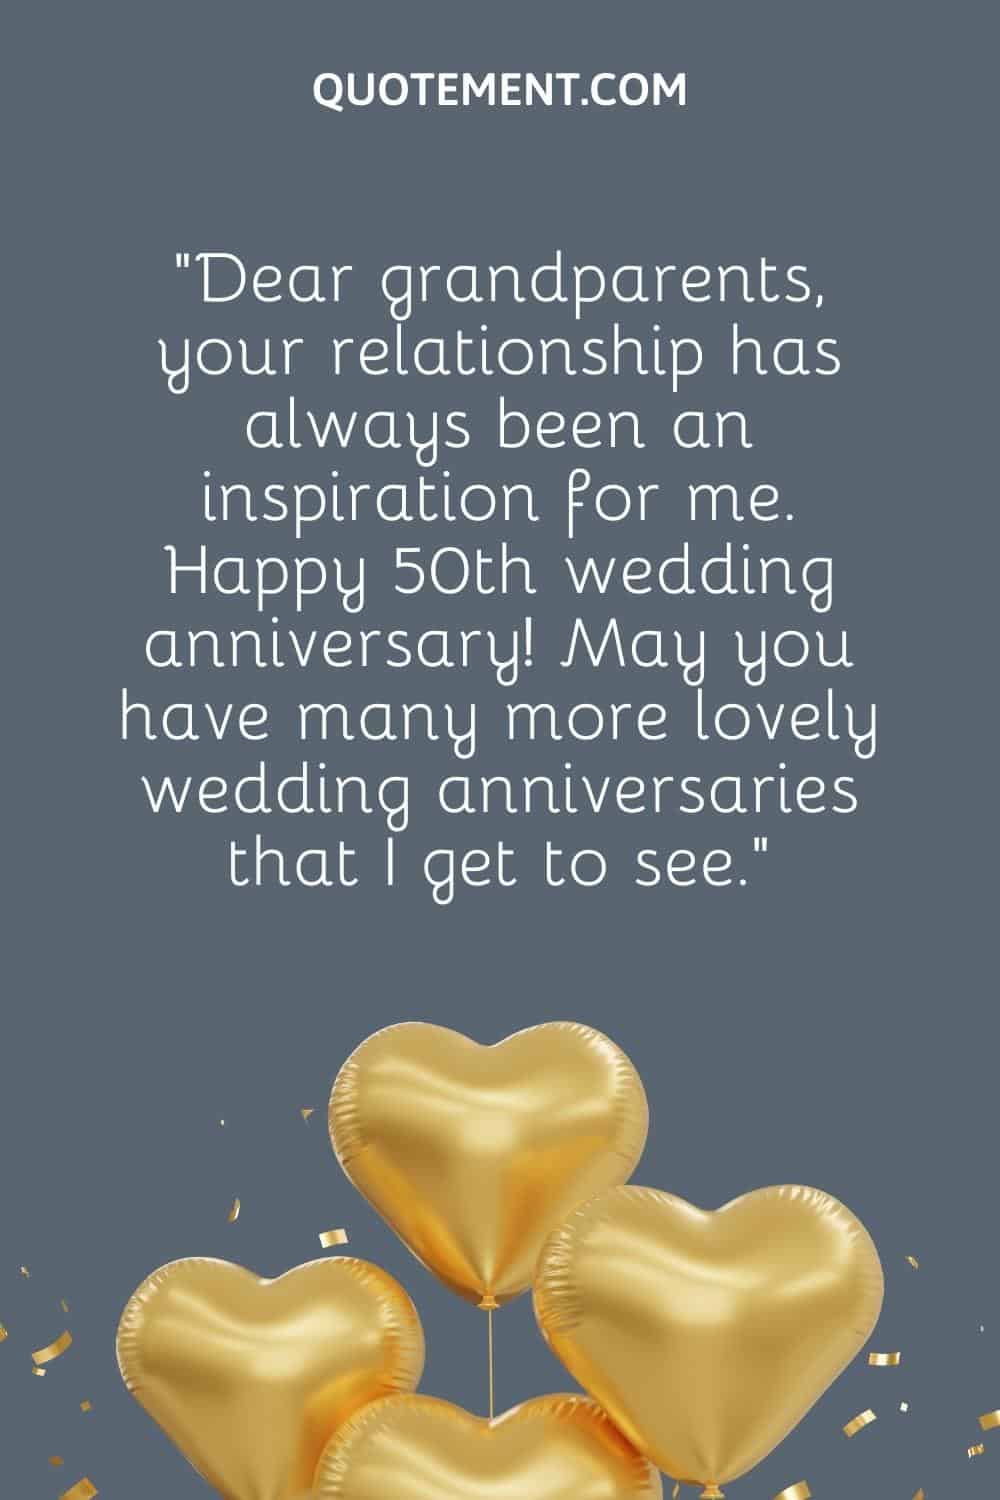 “Dear grandparents, your relationship has always been an inspiration for me. Happy 50th wedding anniversary! May you have many more lovely wedding anniversaries that I get to see.”